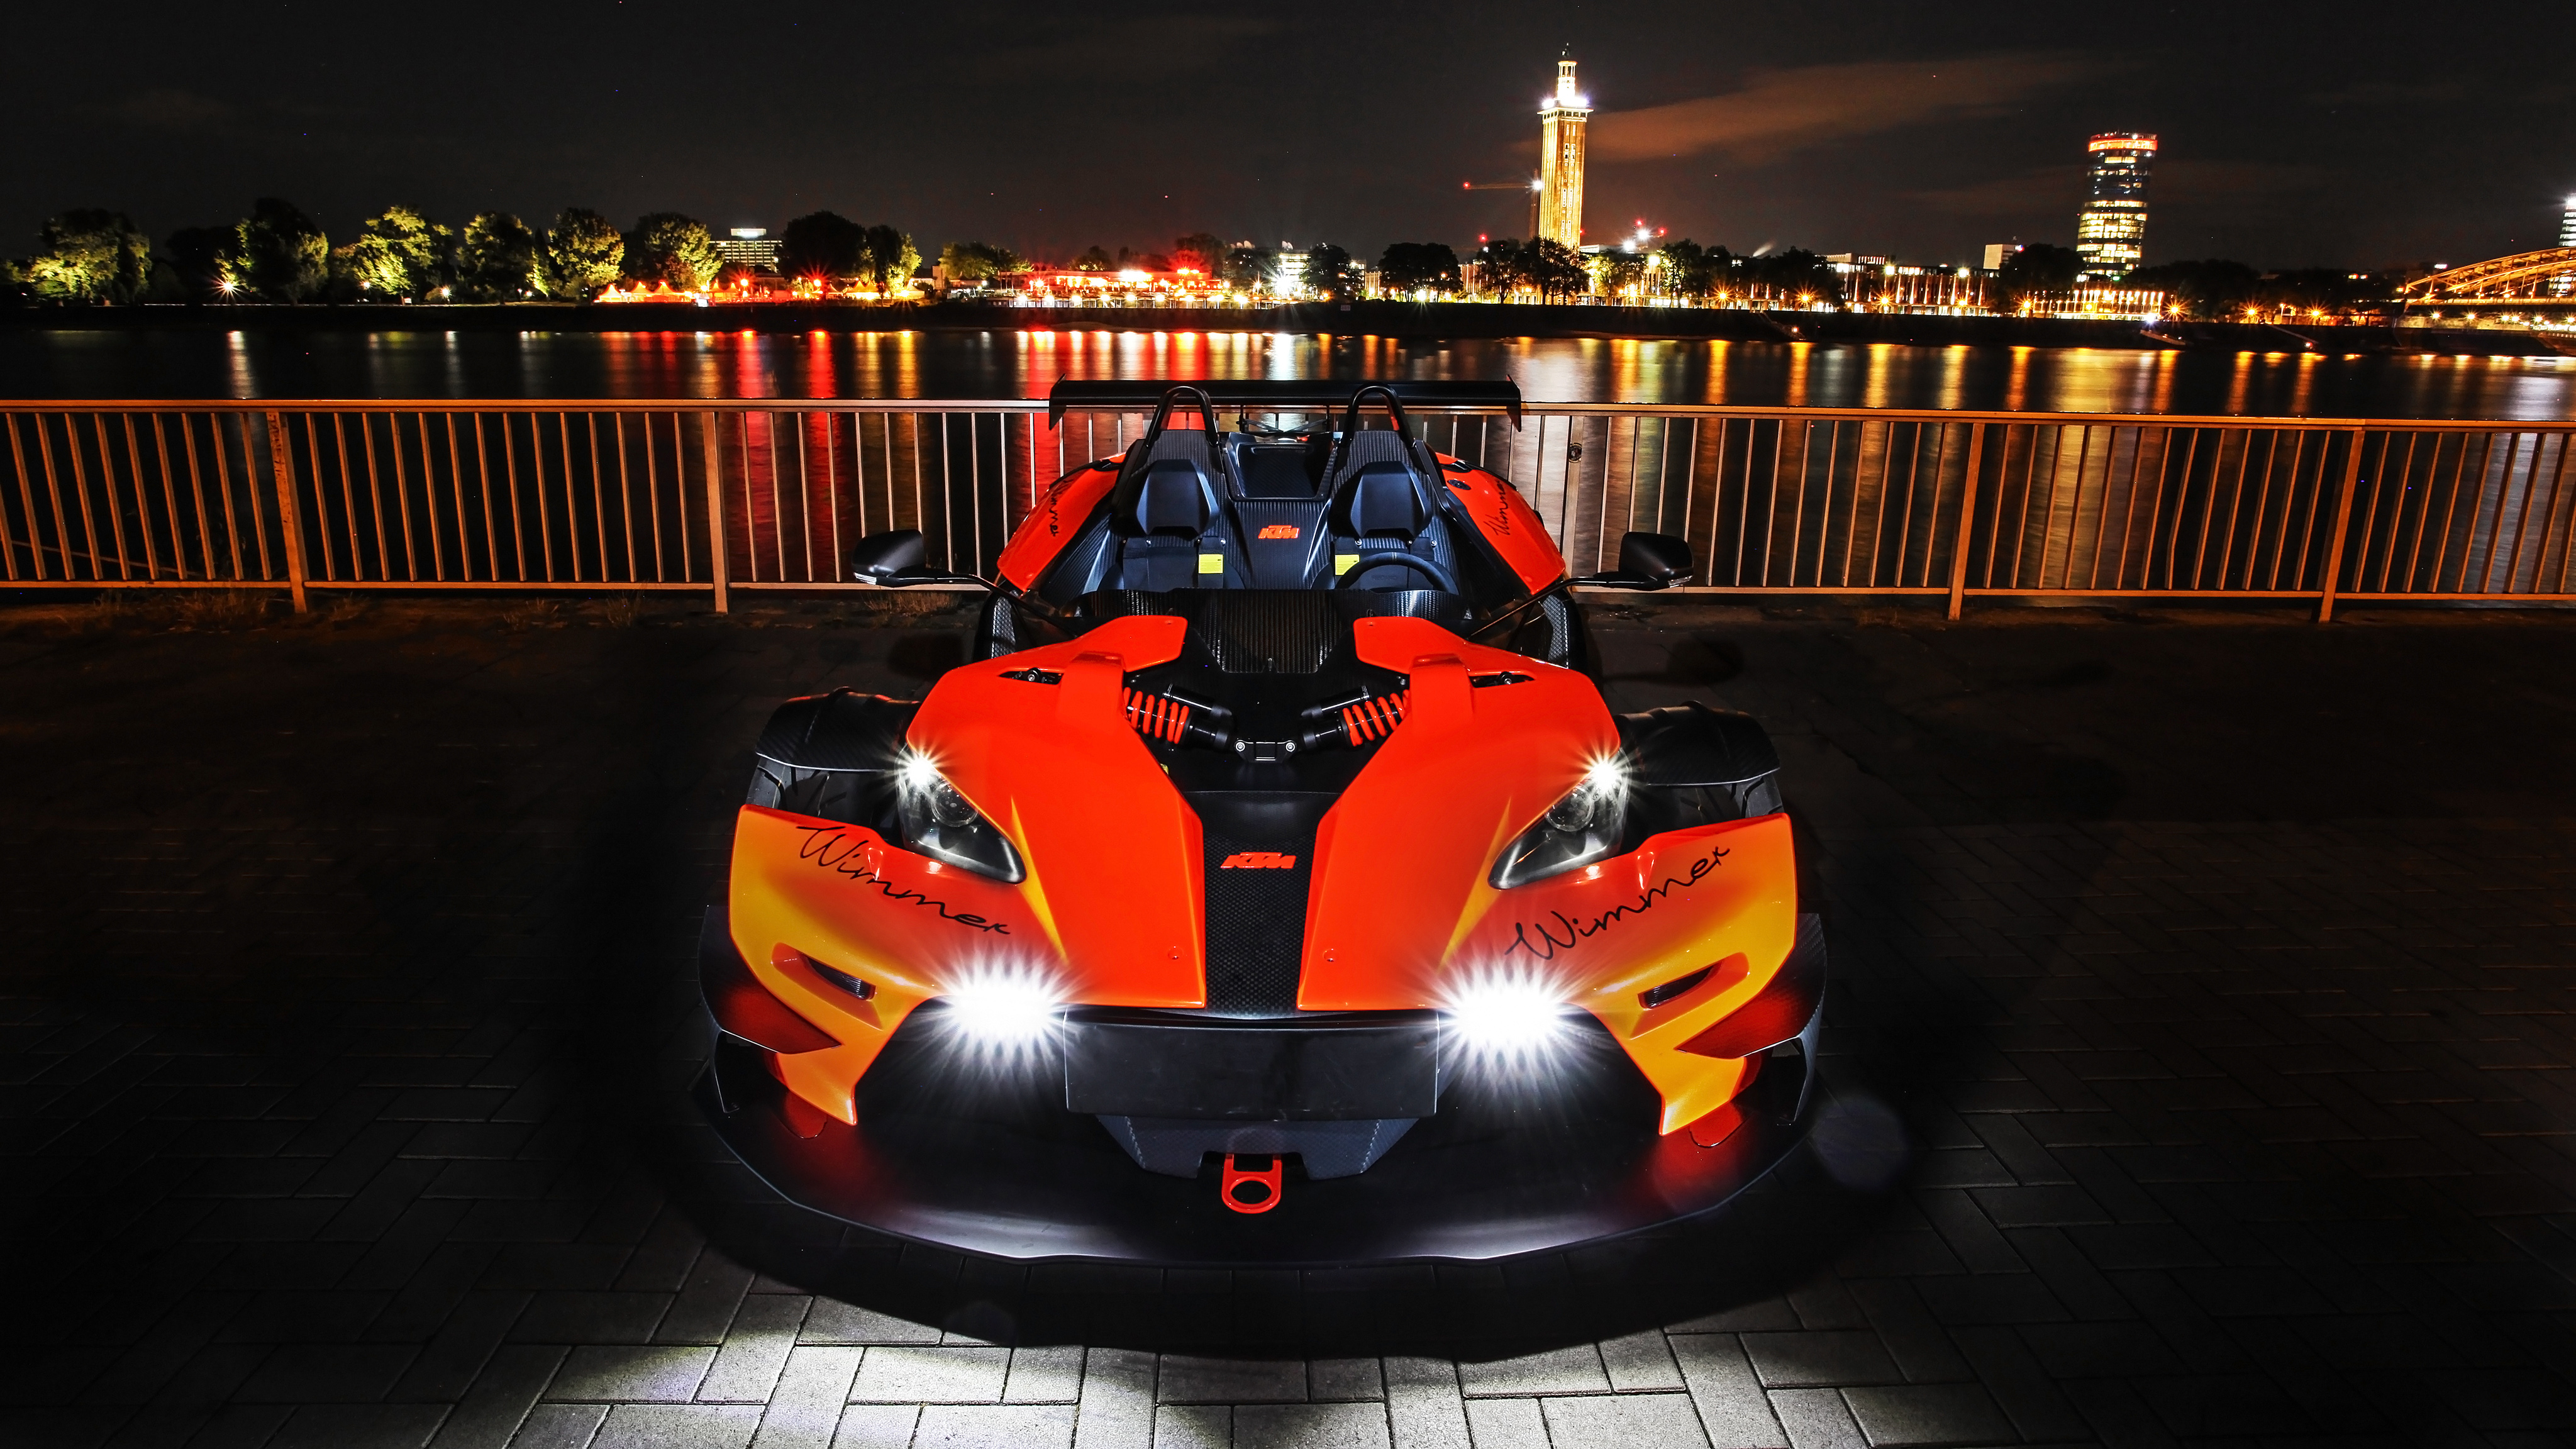 Wimmer RS KTM X-Bow R 2019 4K Wallpaper - HD Car Wallpapers #11767